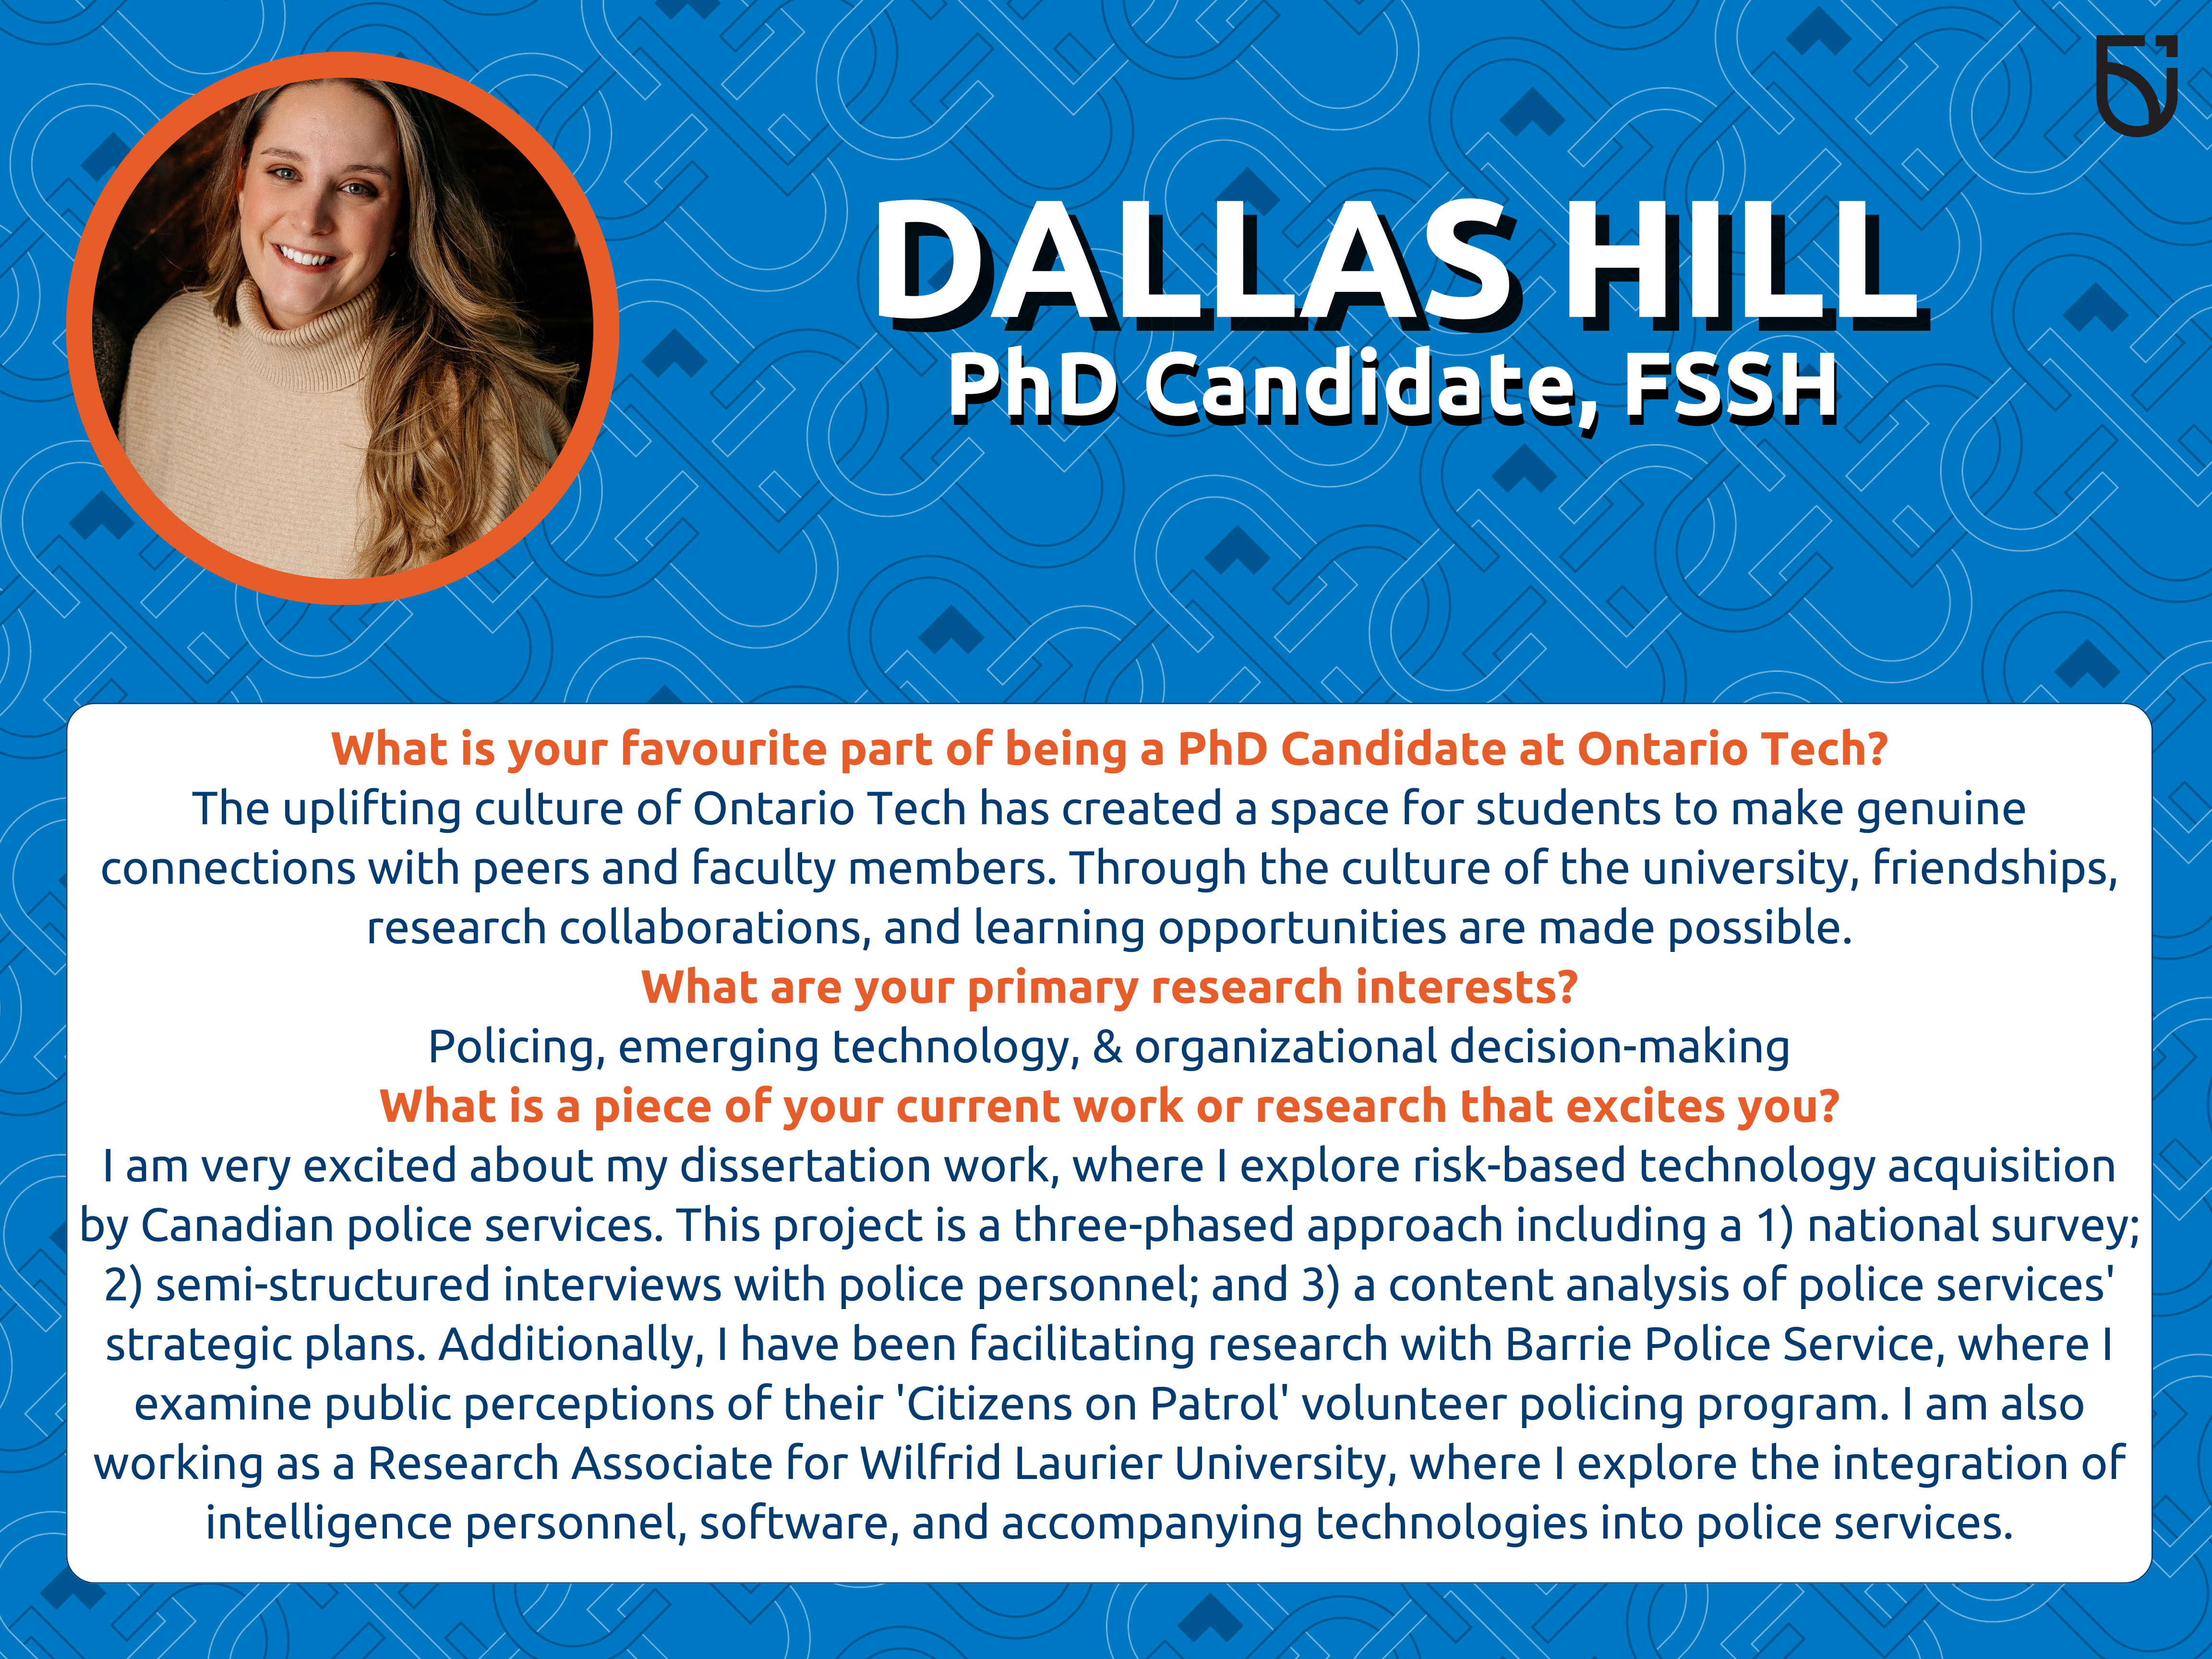 This photo is a Women’s Wednesday feature of Dallas Hill, a PhD Candidate in the Faculty of Social Science and Humanities.